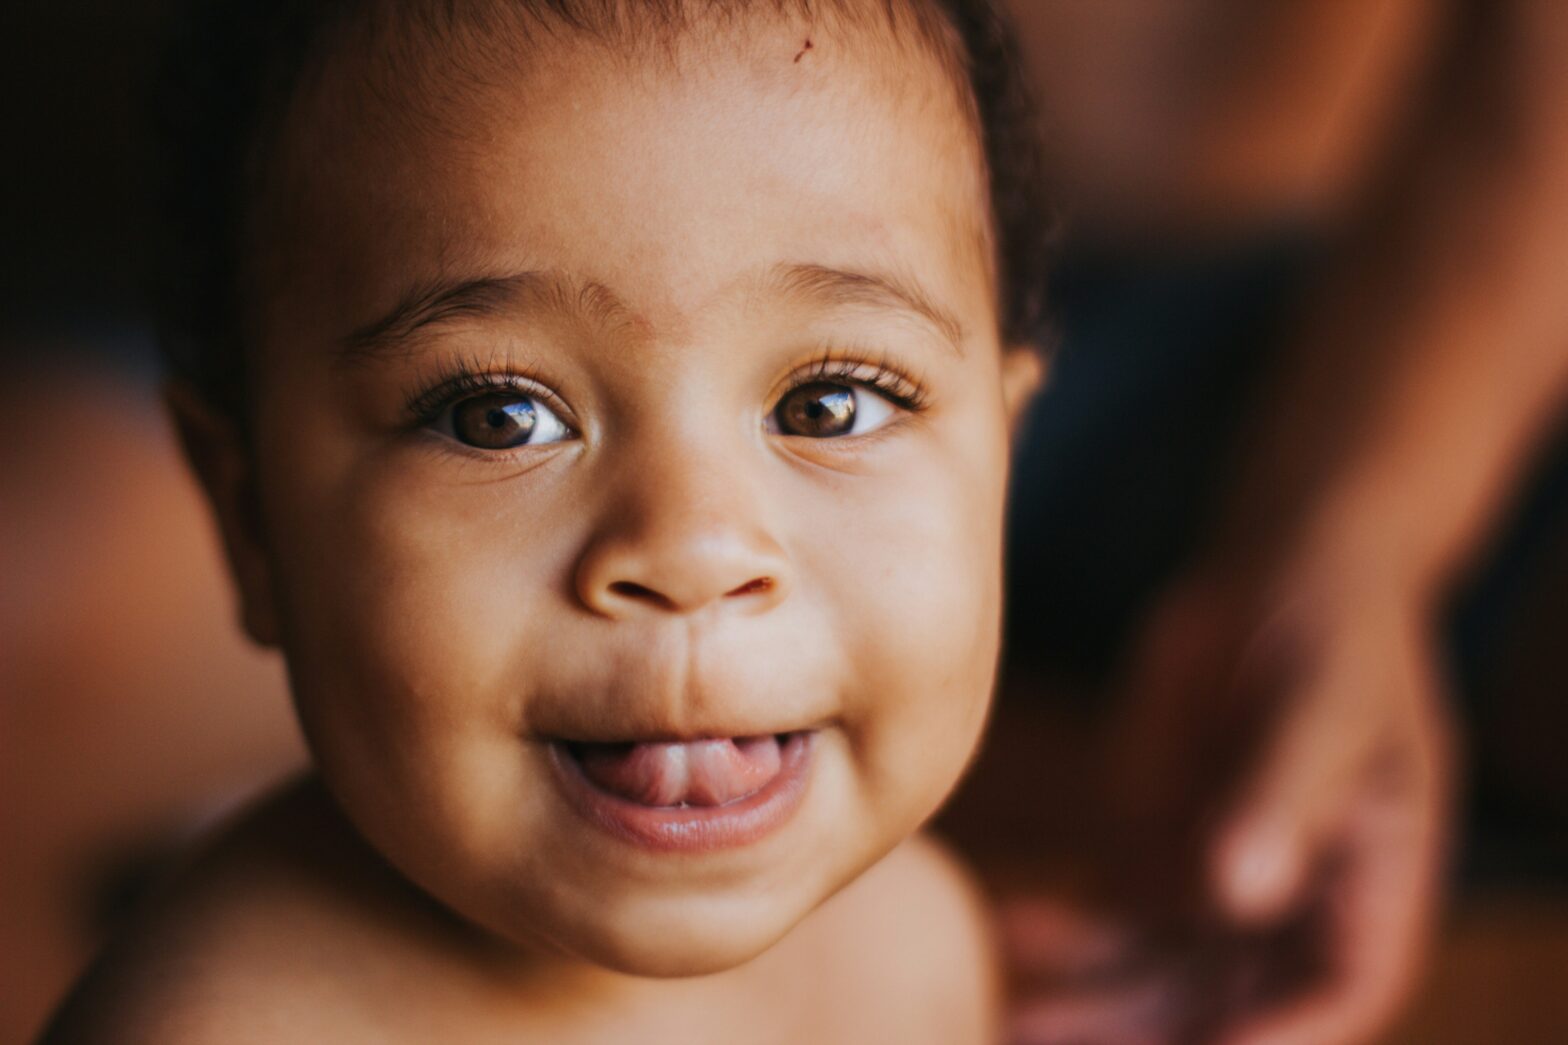 Learn more about how your bundle of joy will express happiness with their adorable laugh. Pictured: a Black baby with an expression of happiness